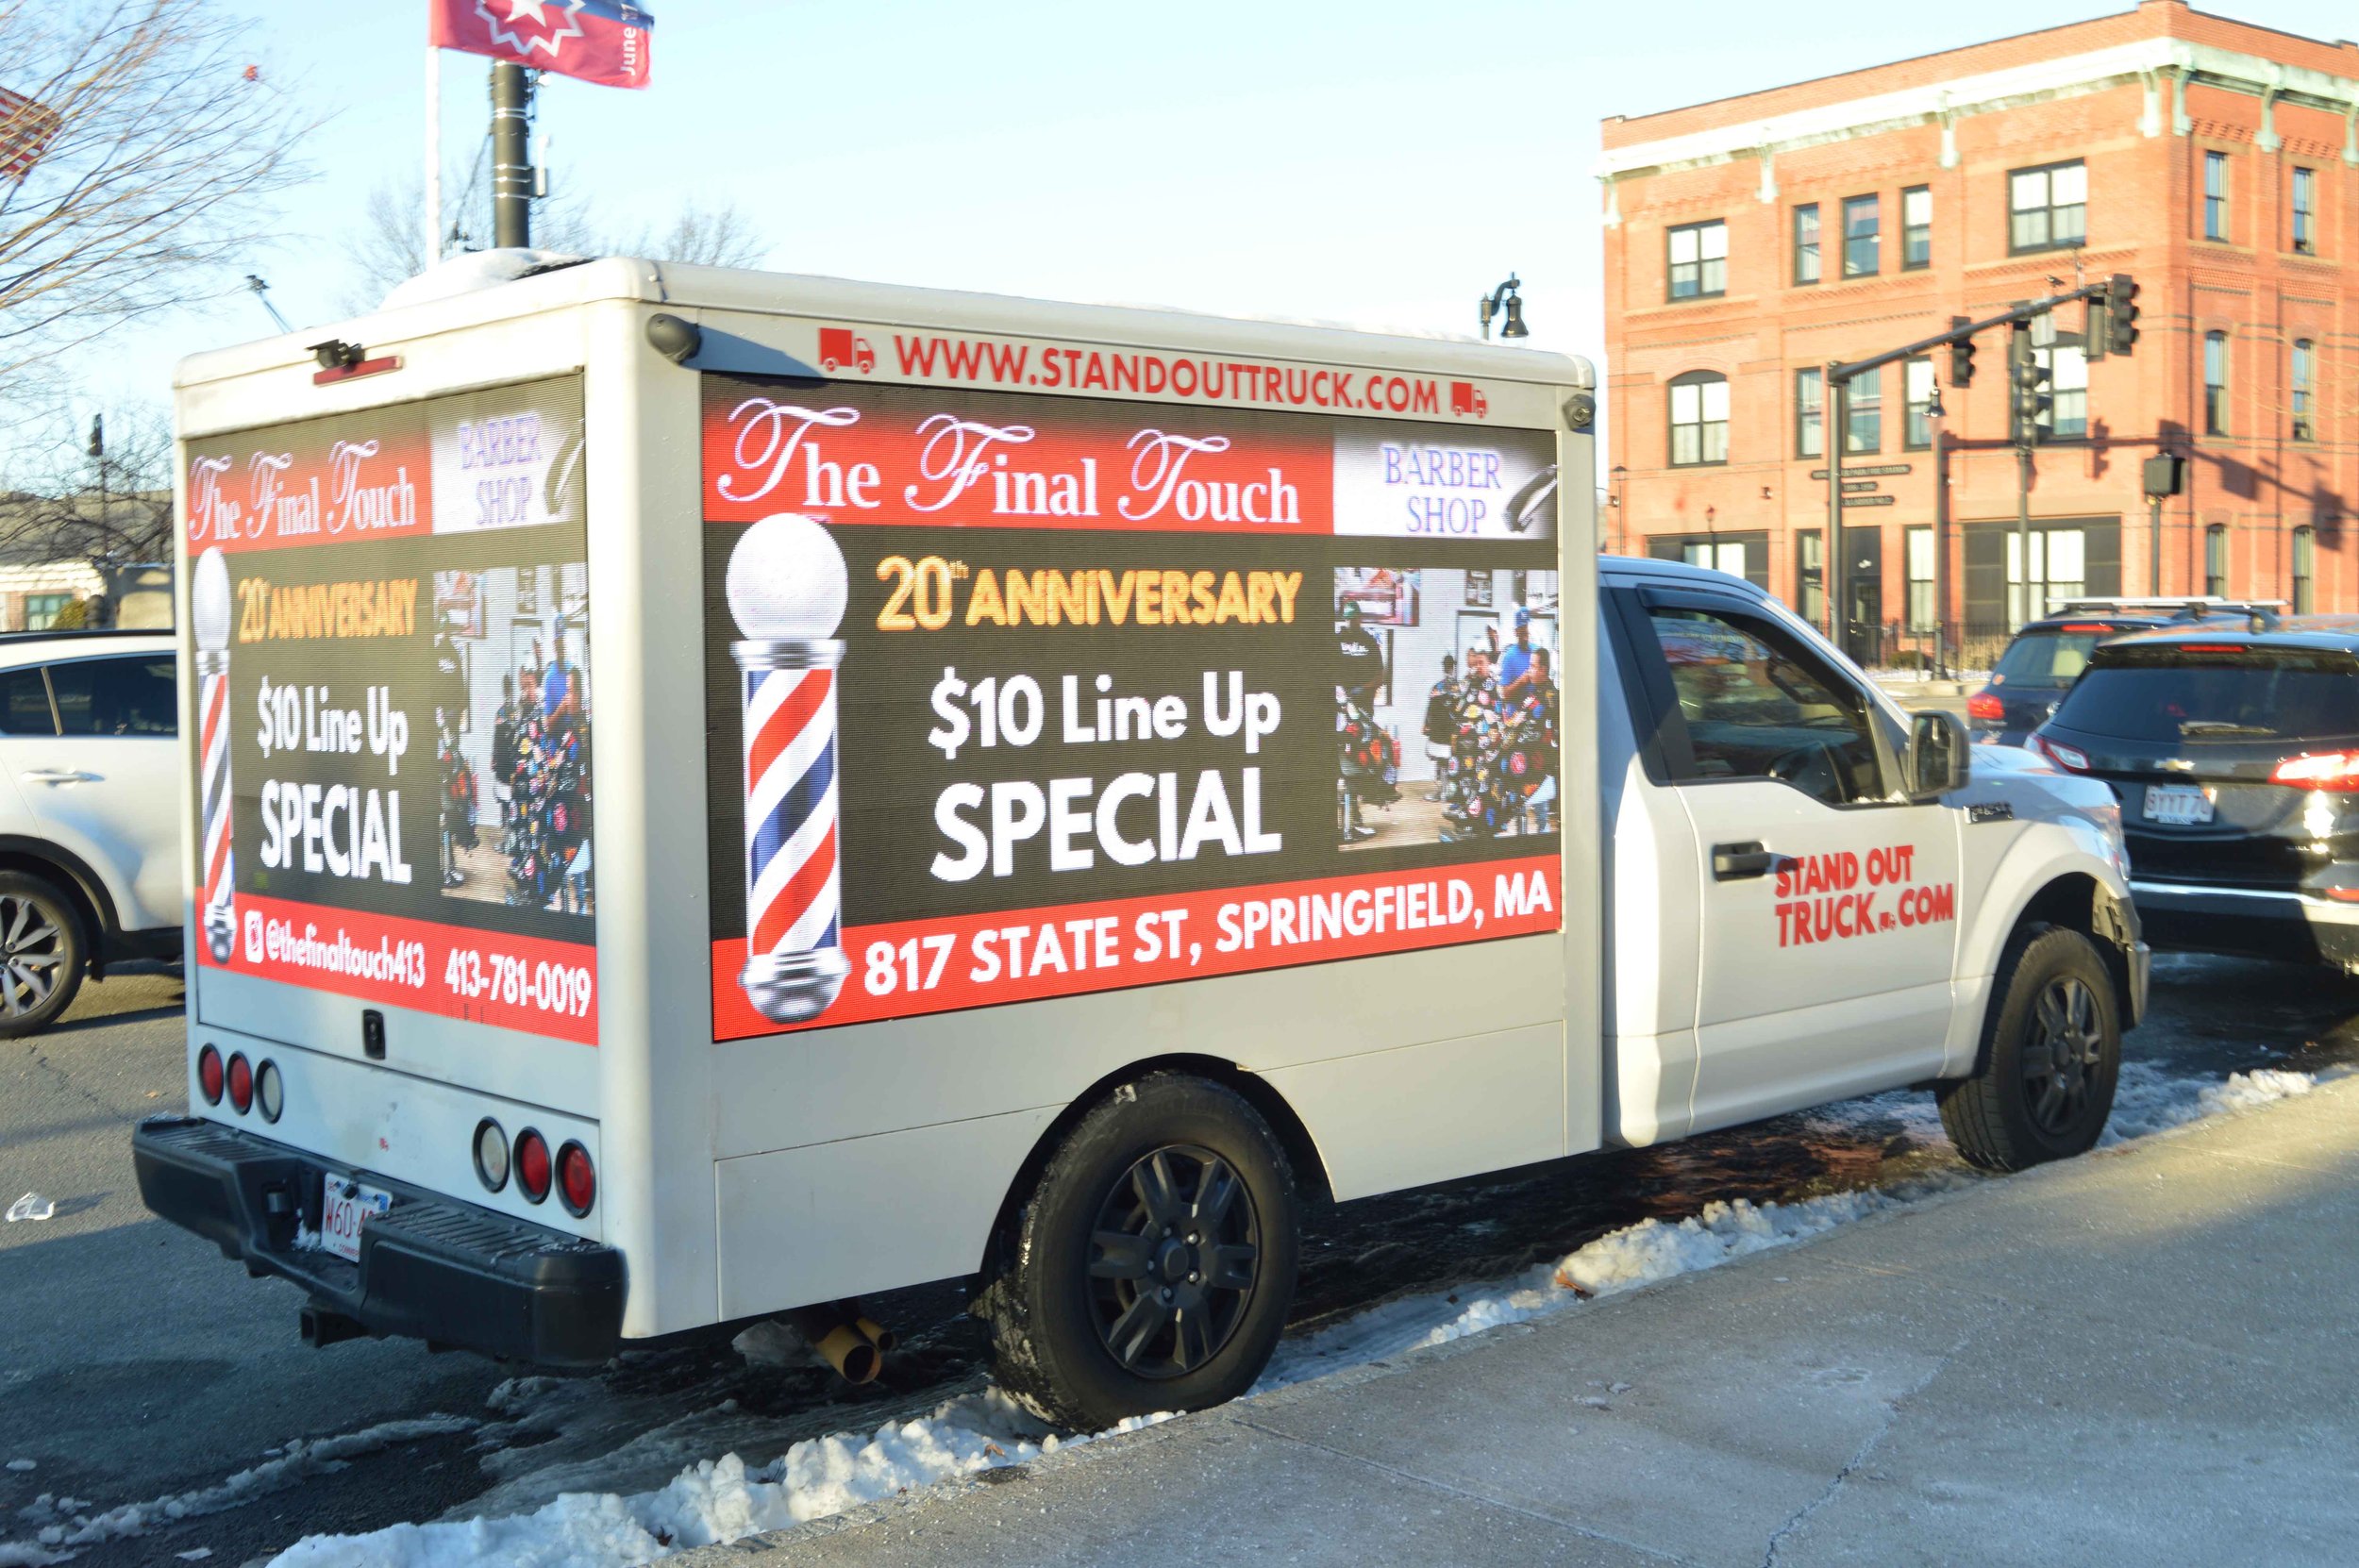 Final Touch Barber Shop Stand Out Truck2.JPG